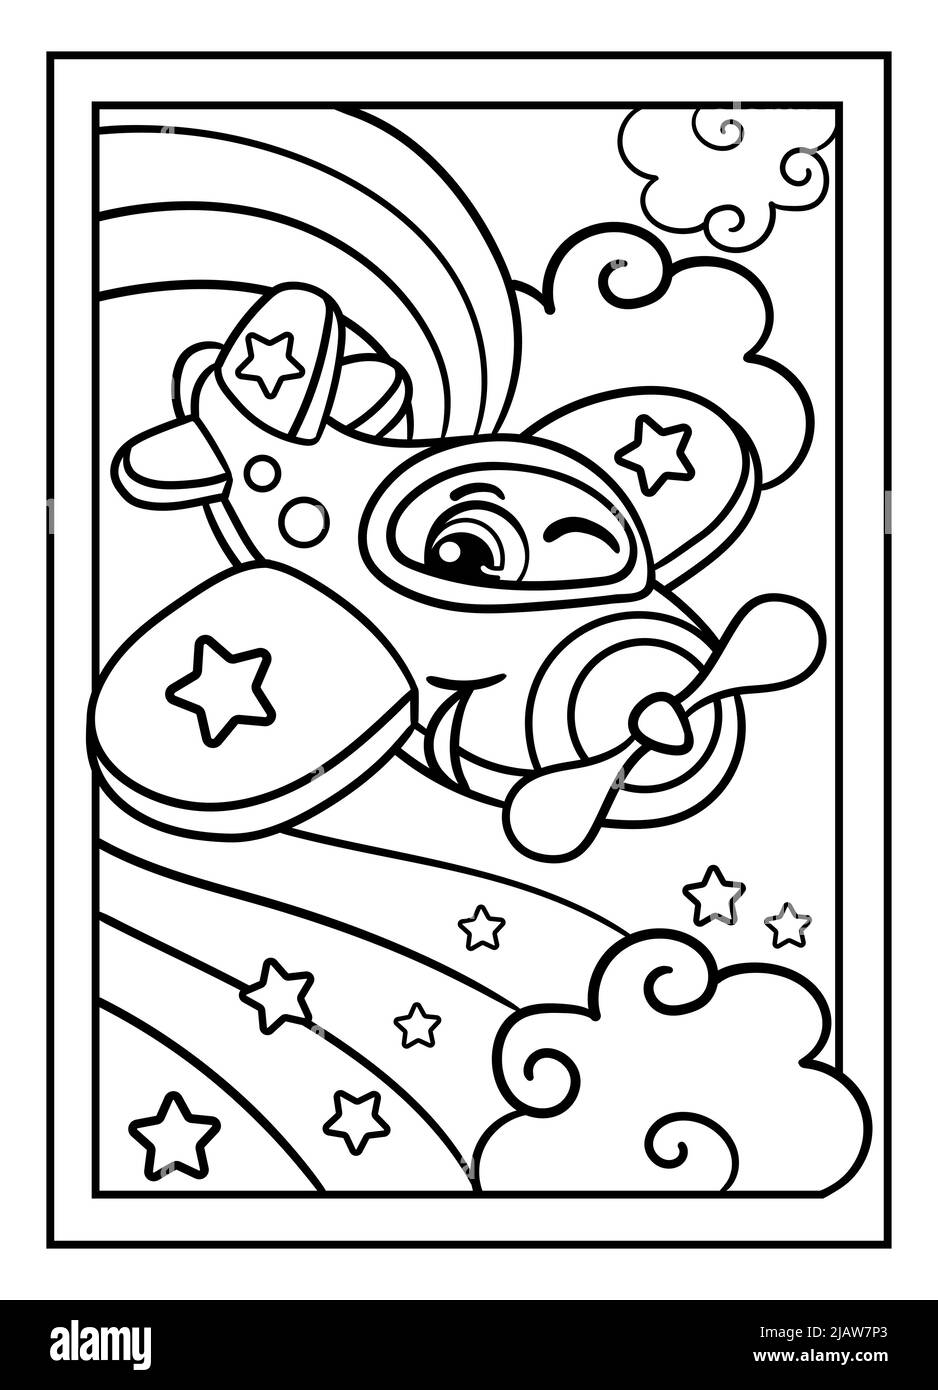 Cartoon cute happy plane in the sky. Coloring book page with black contour for kids. Vector isolated illustration. For coloring book, print, game, par Stock Vector